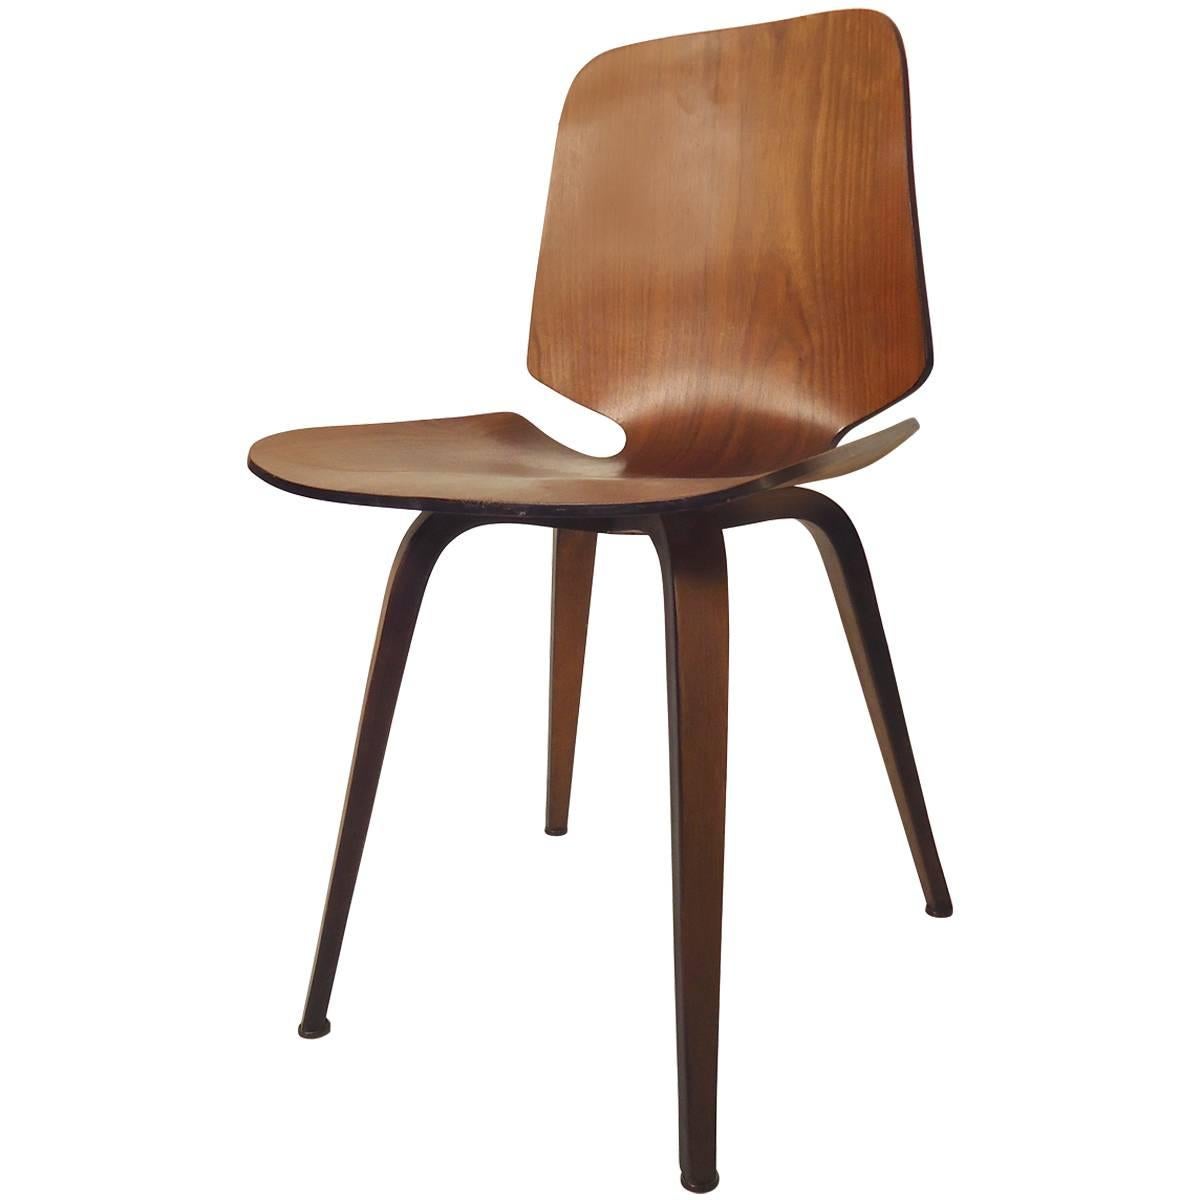 Vintage Bent Plywood Chair by George Mulhauser for Plycraft